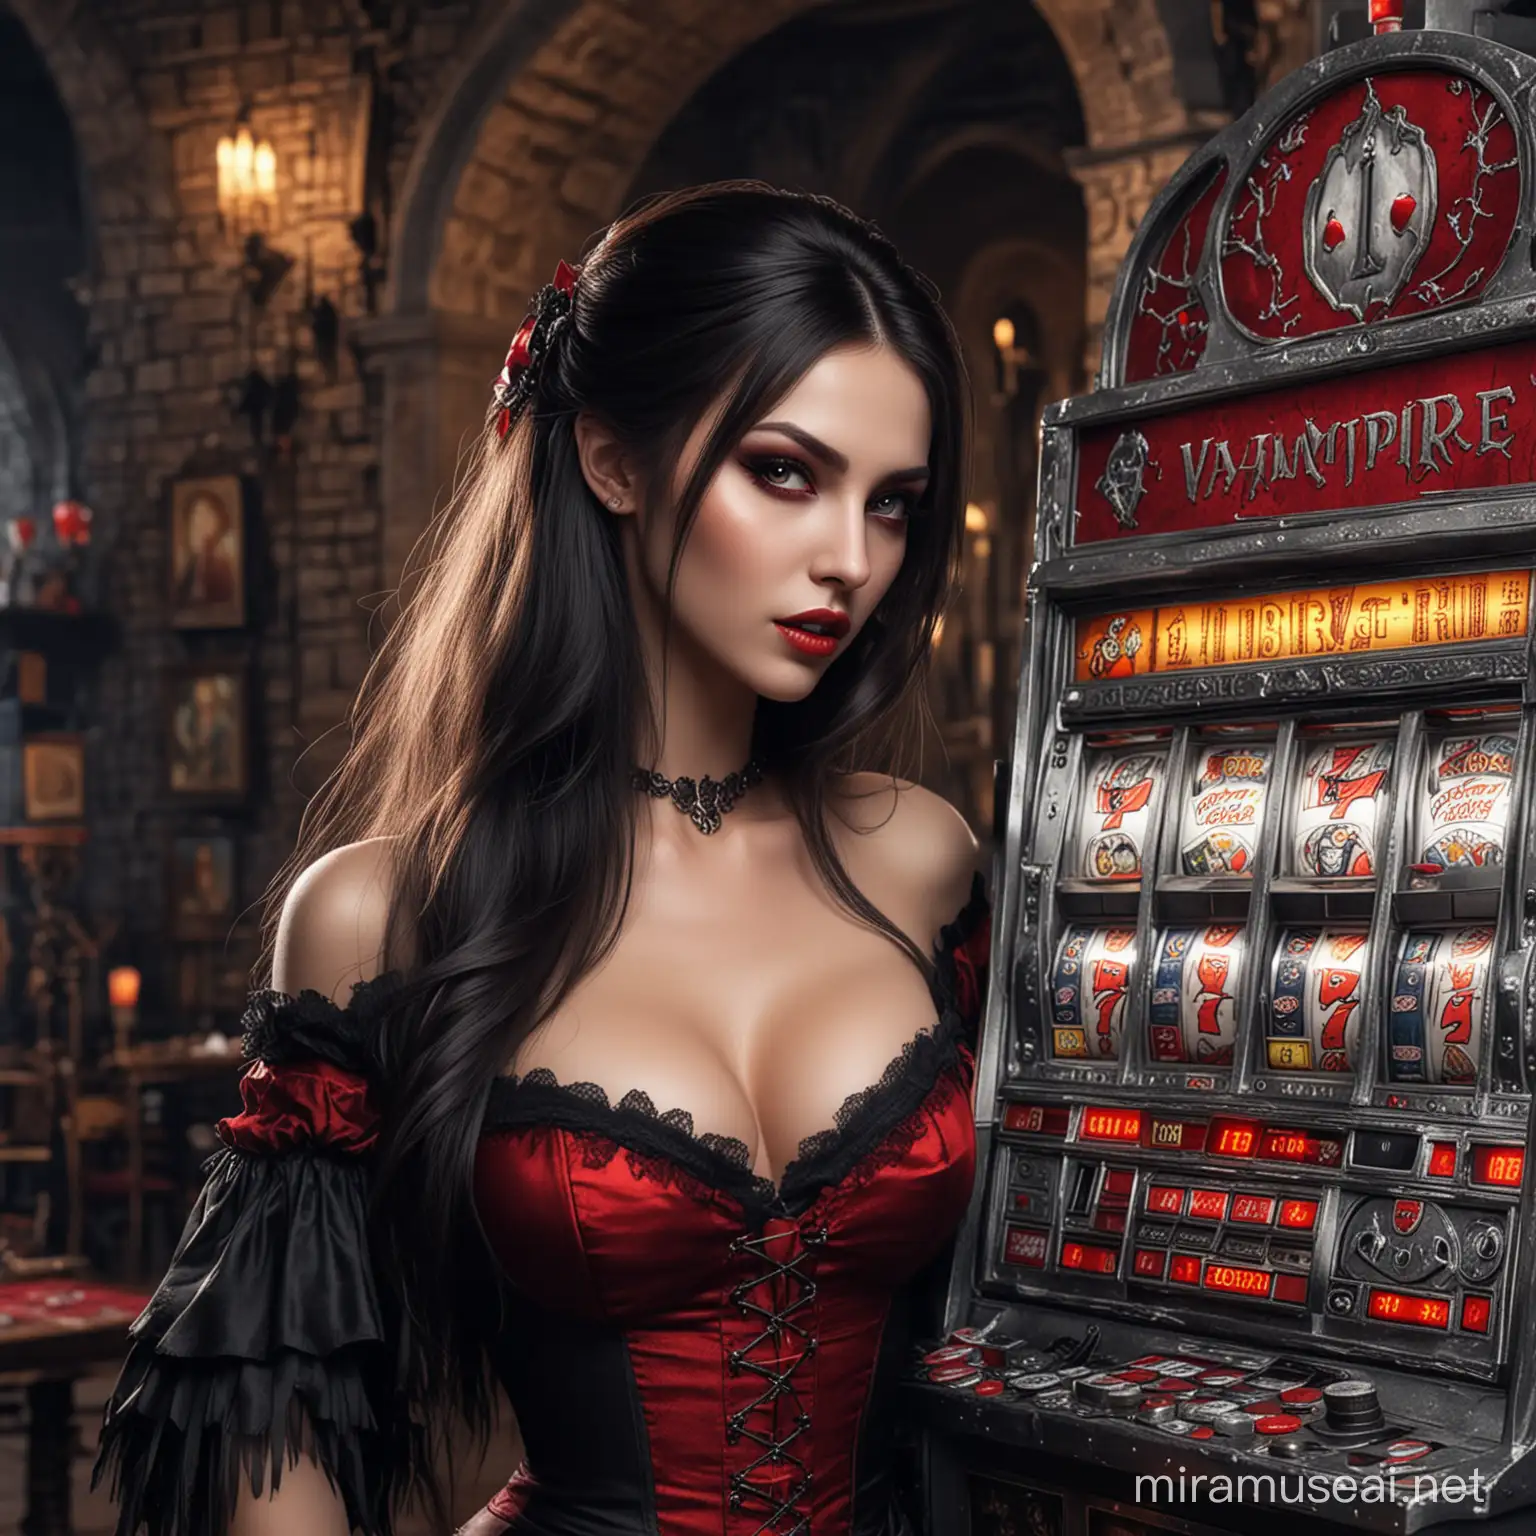 Vampire Beauty Surrounded by Slot Machines and Coins in a Castle